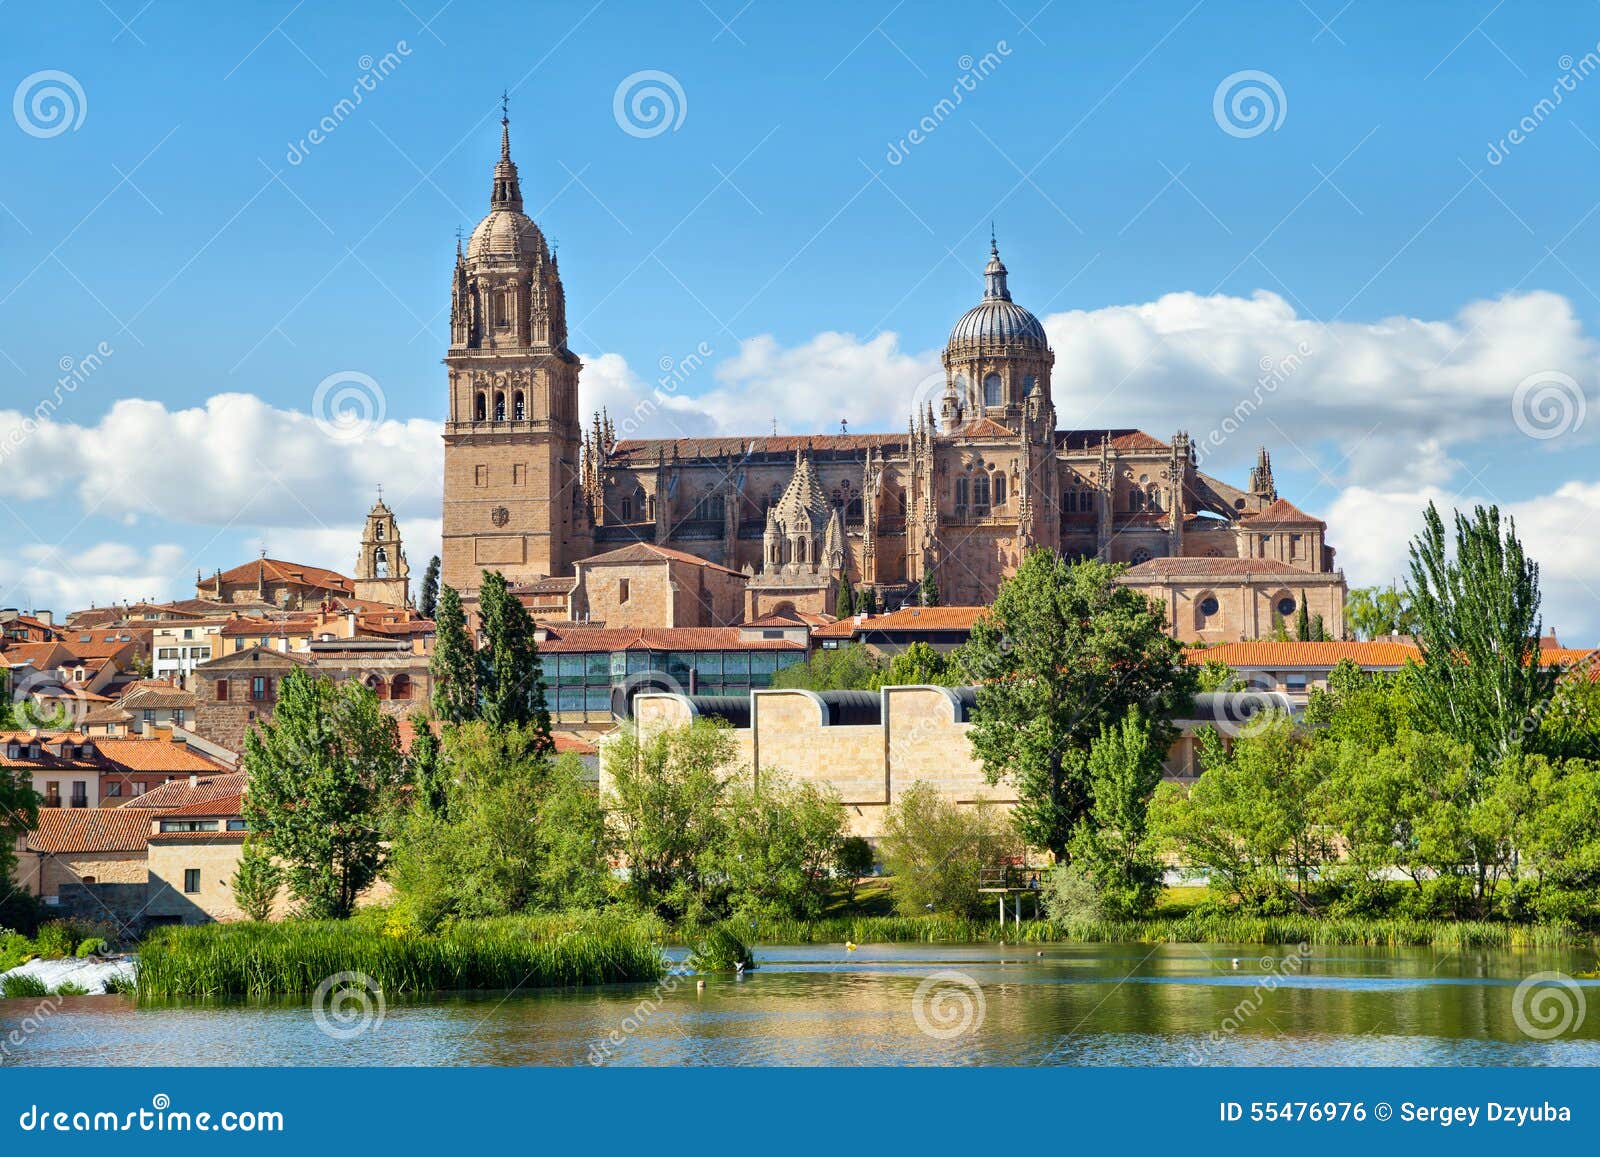 new cathedral in salamanca - view from river side